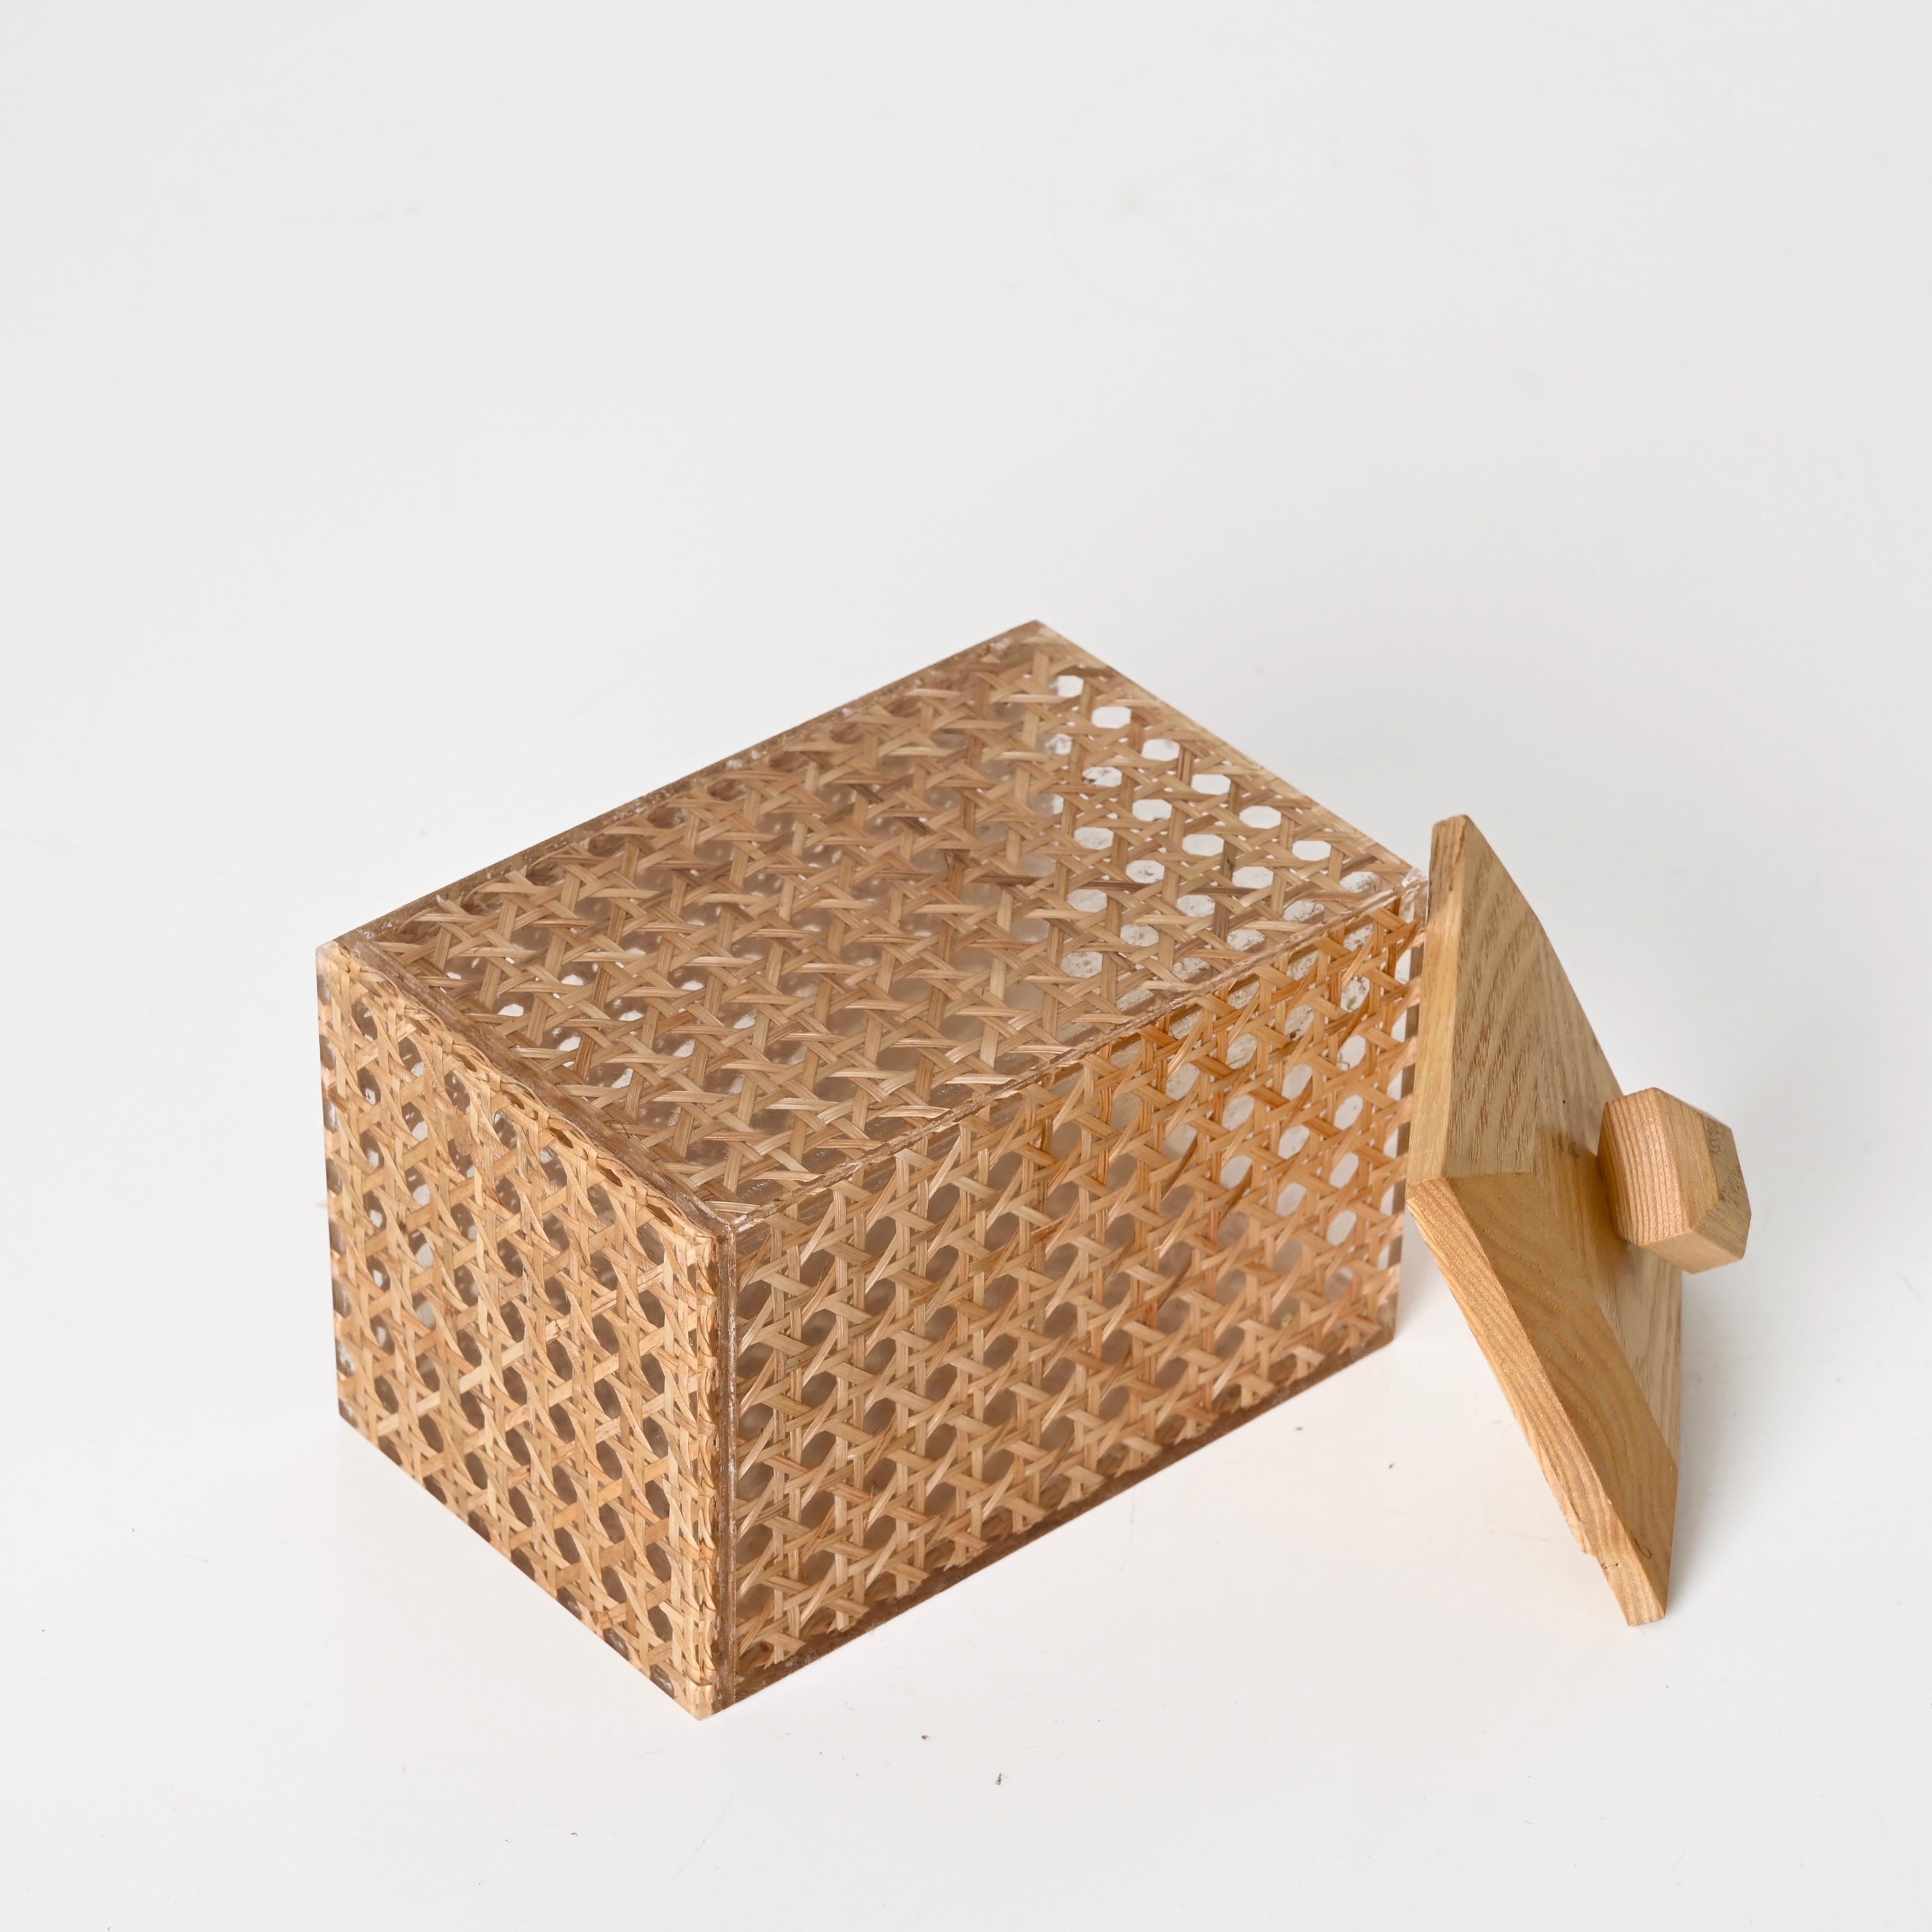 Wicker, Lucite an Wood Decorative Box, Christian Dior Style, Italy 1970s  For Sale 4